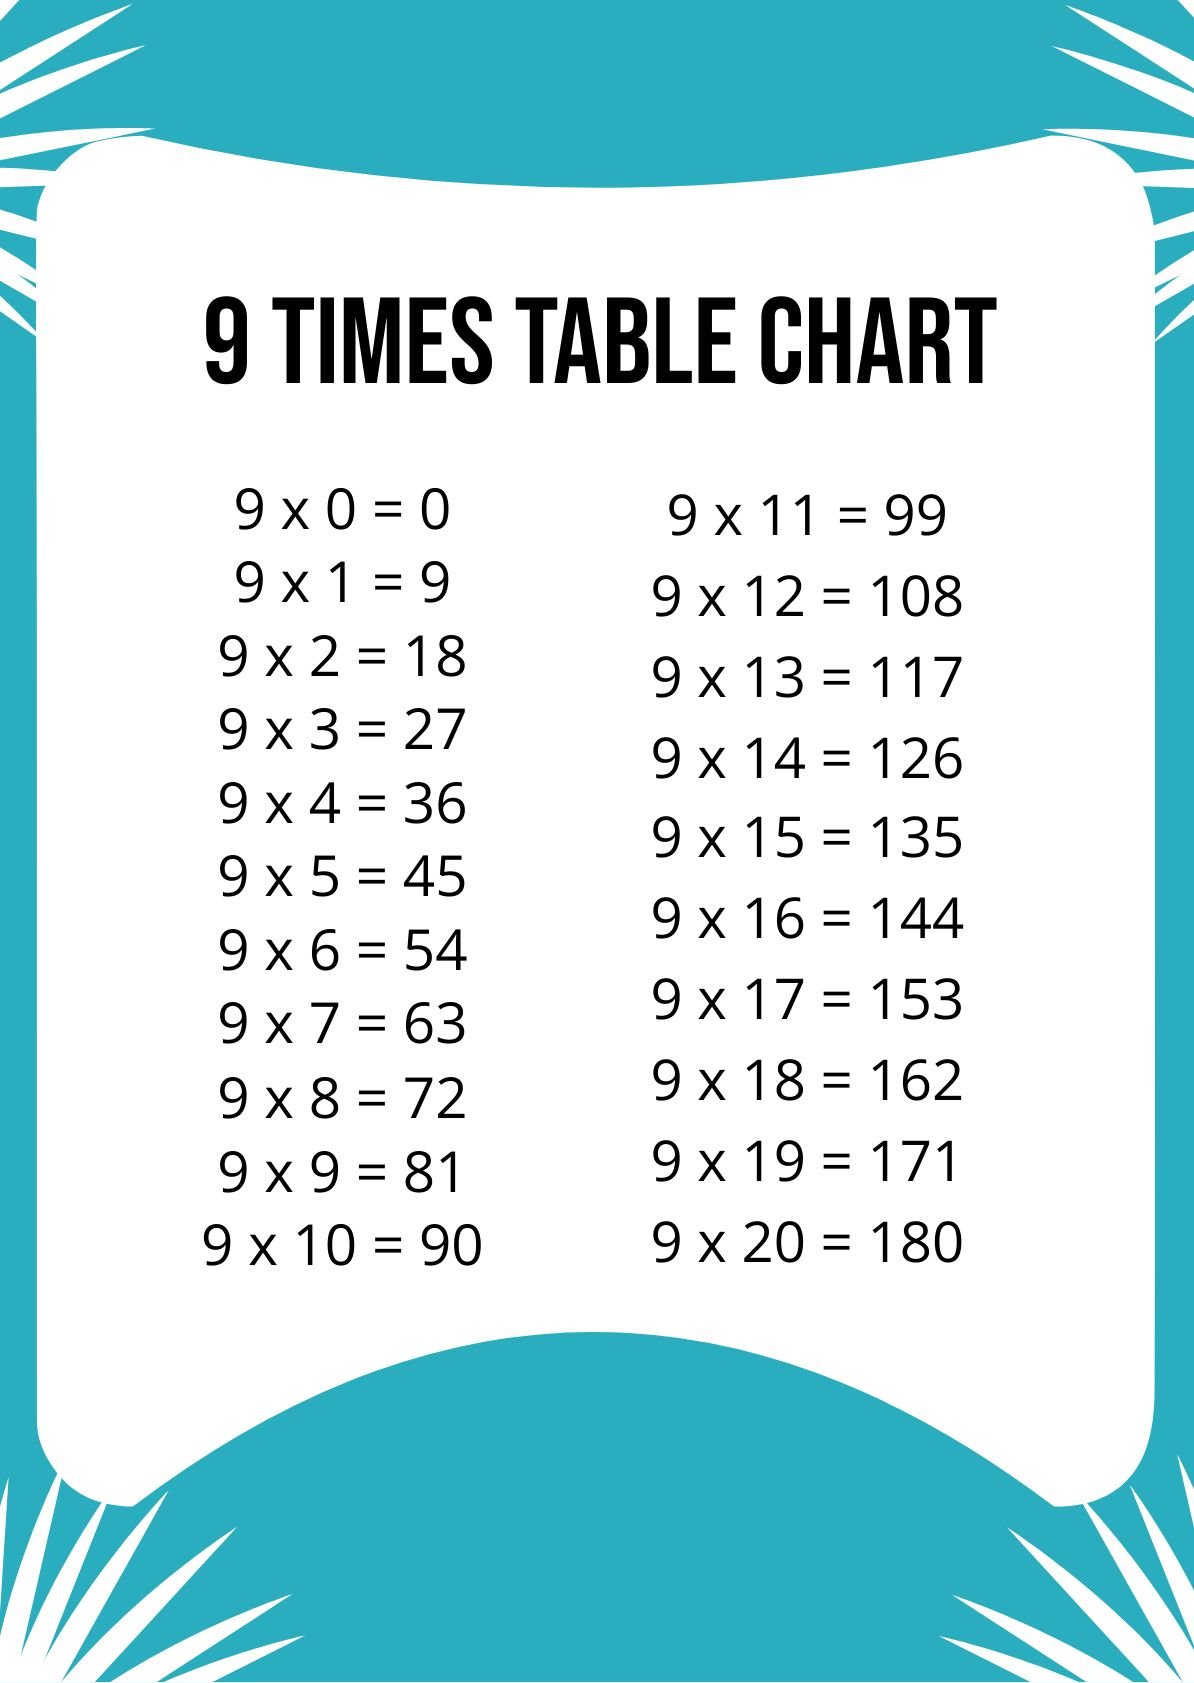 9 Times Table Chart in PDF